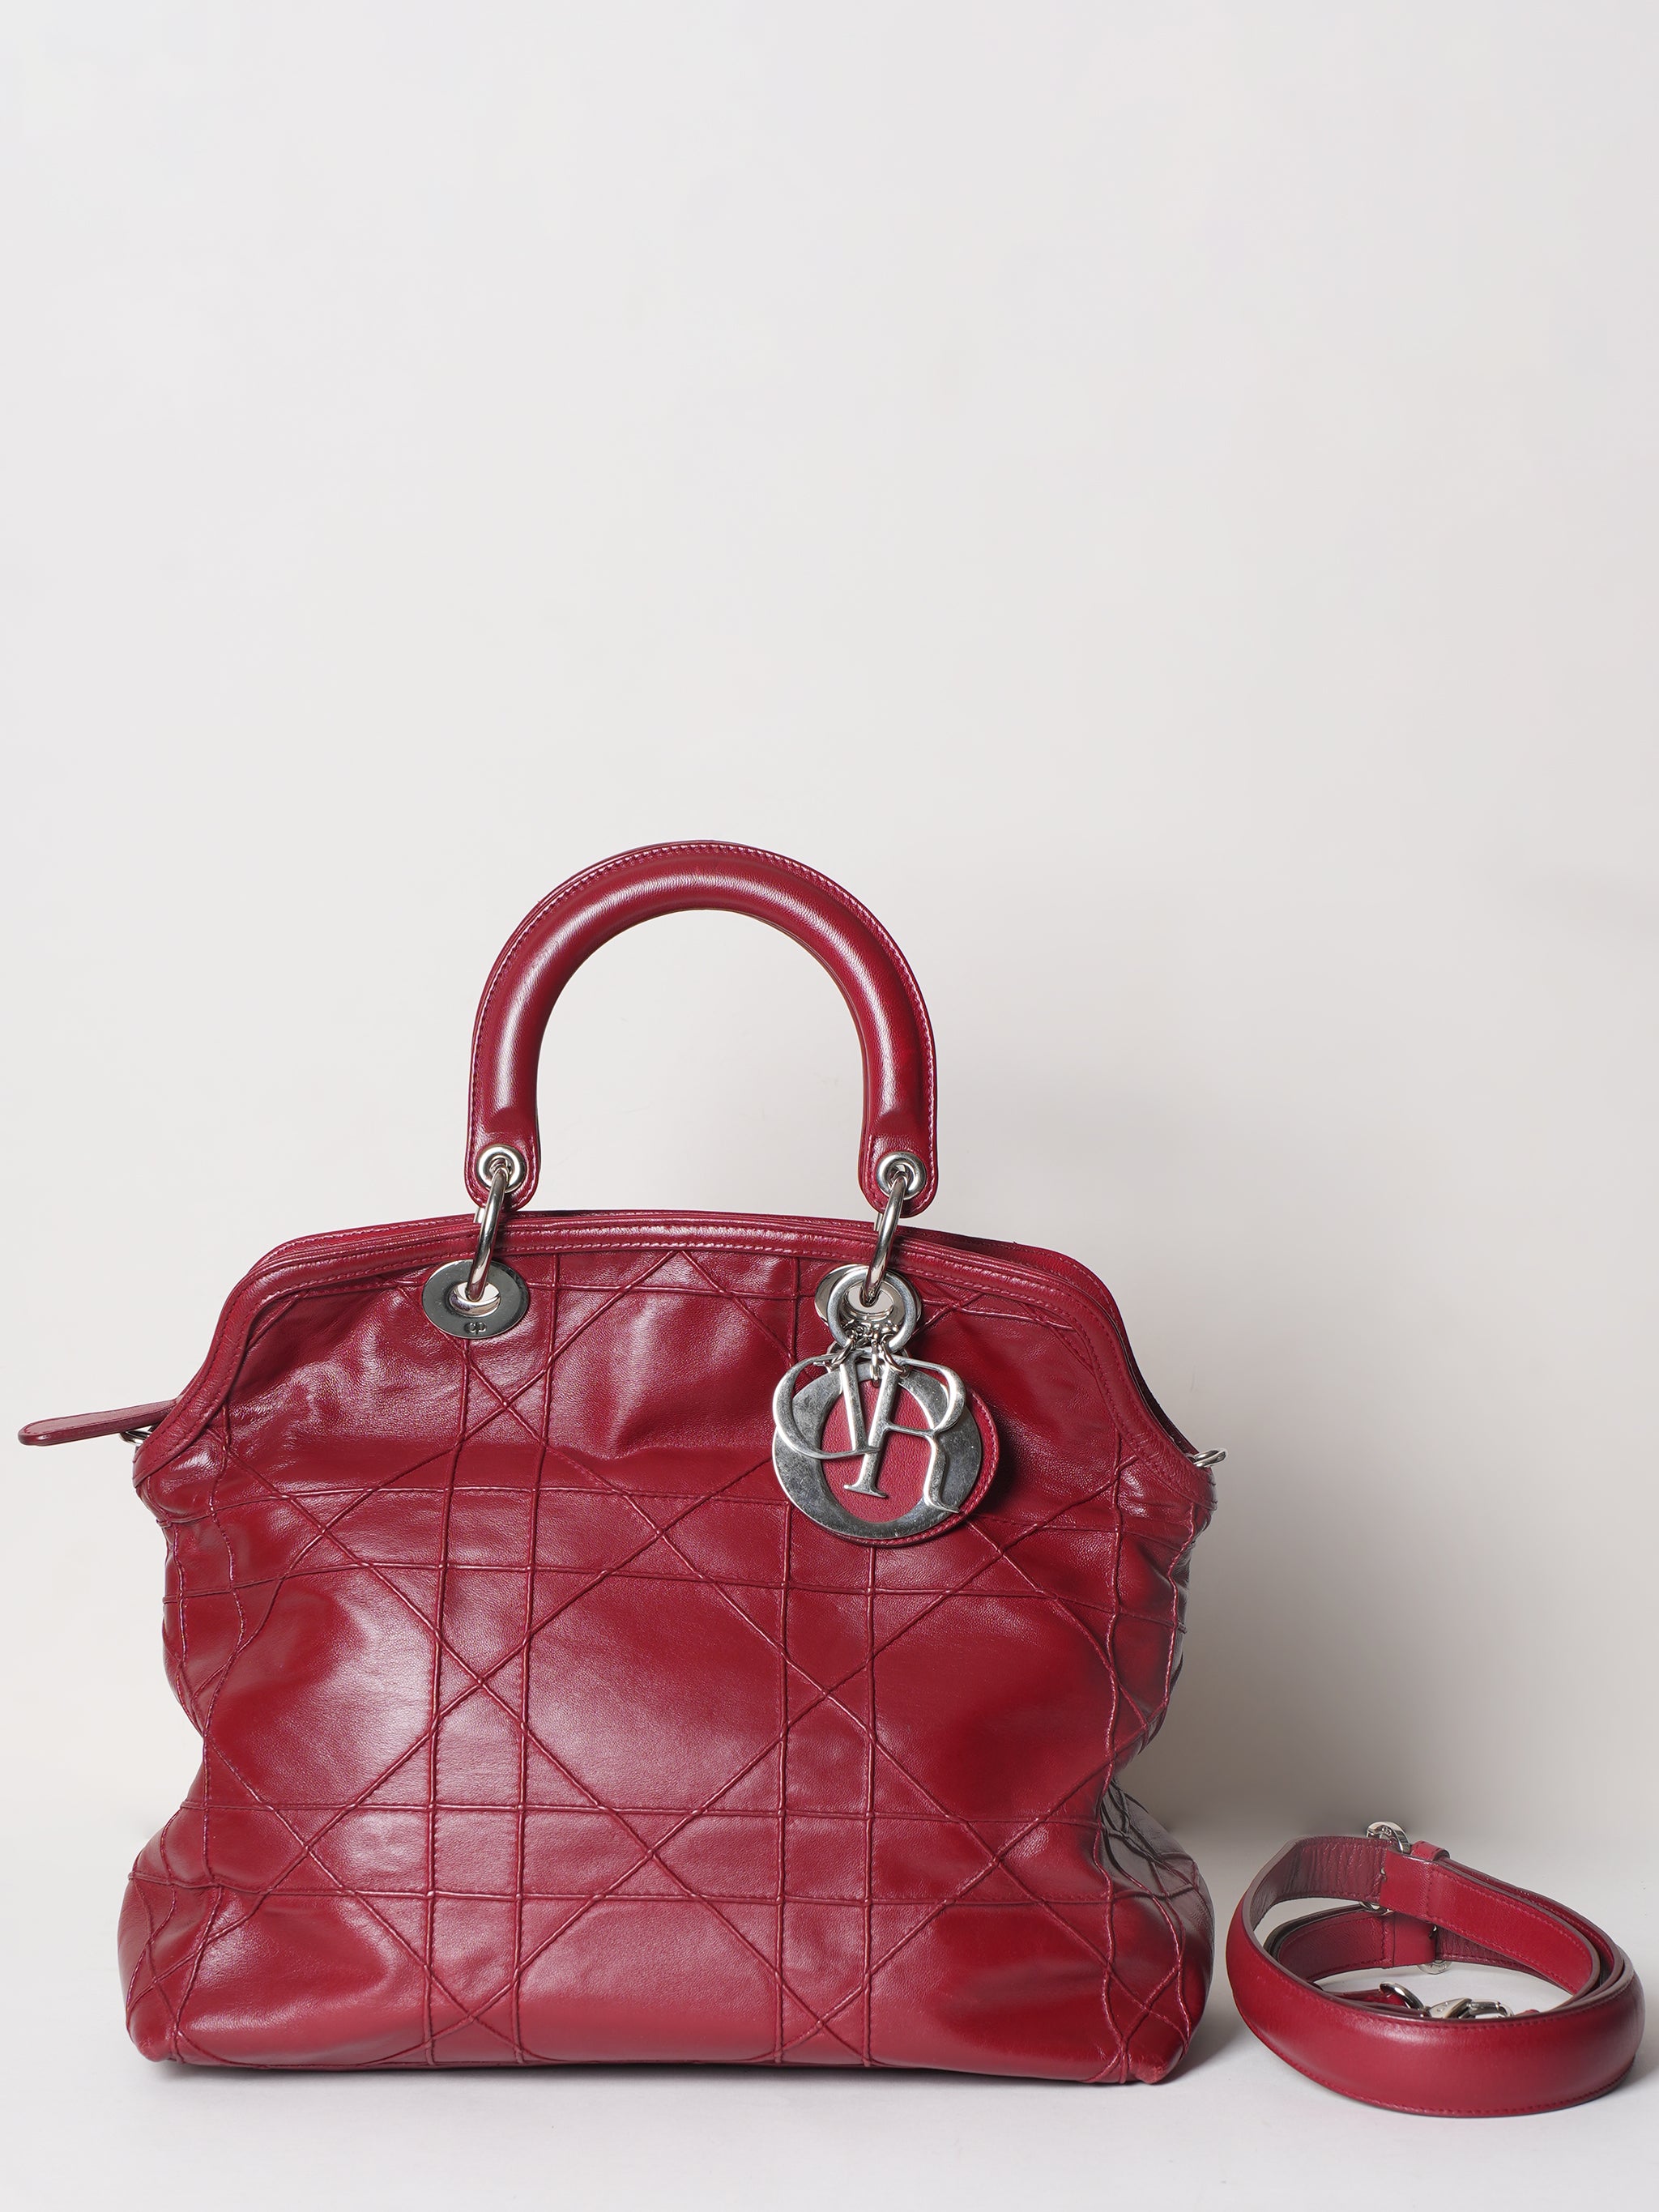 Christian Dior Polochon Cannage Rouge Dior Grenville Top Handle Bag In Red